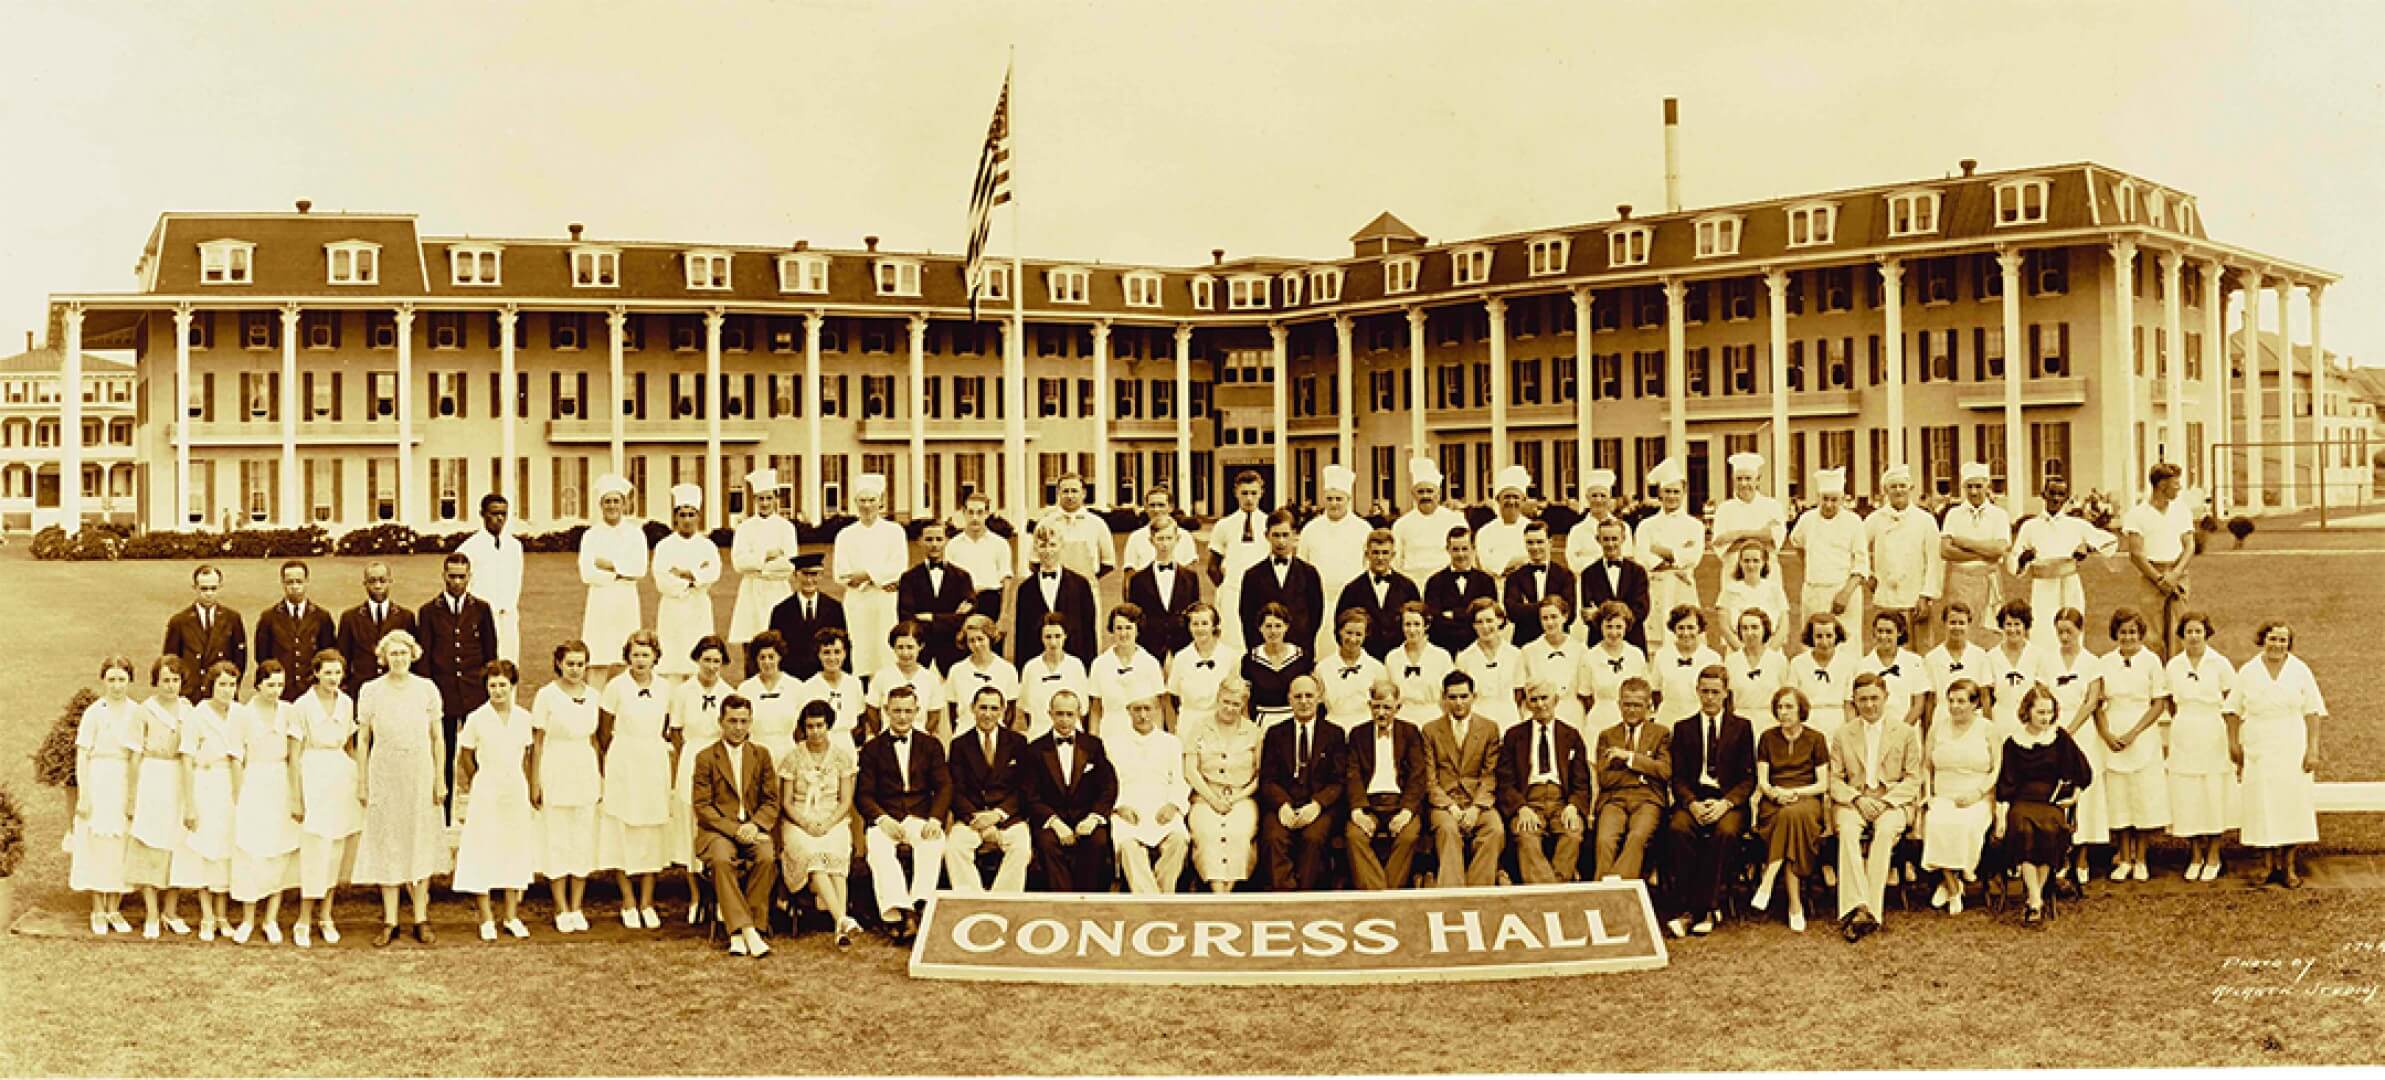 Congress Hall Hotel Stay At America S First Seaside Resort